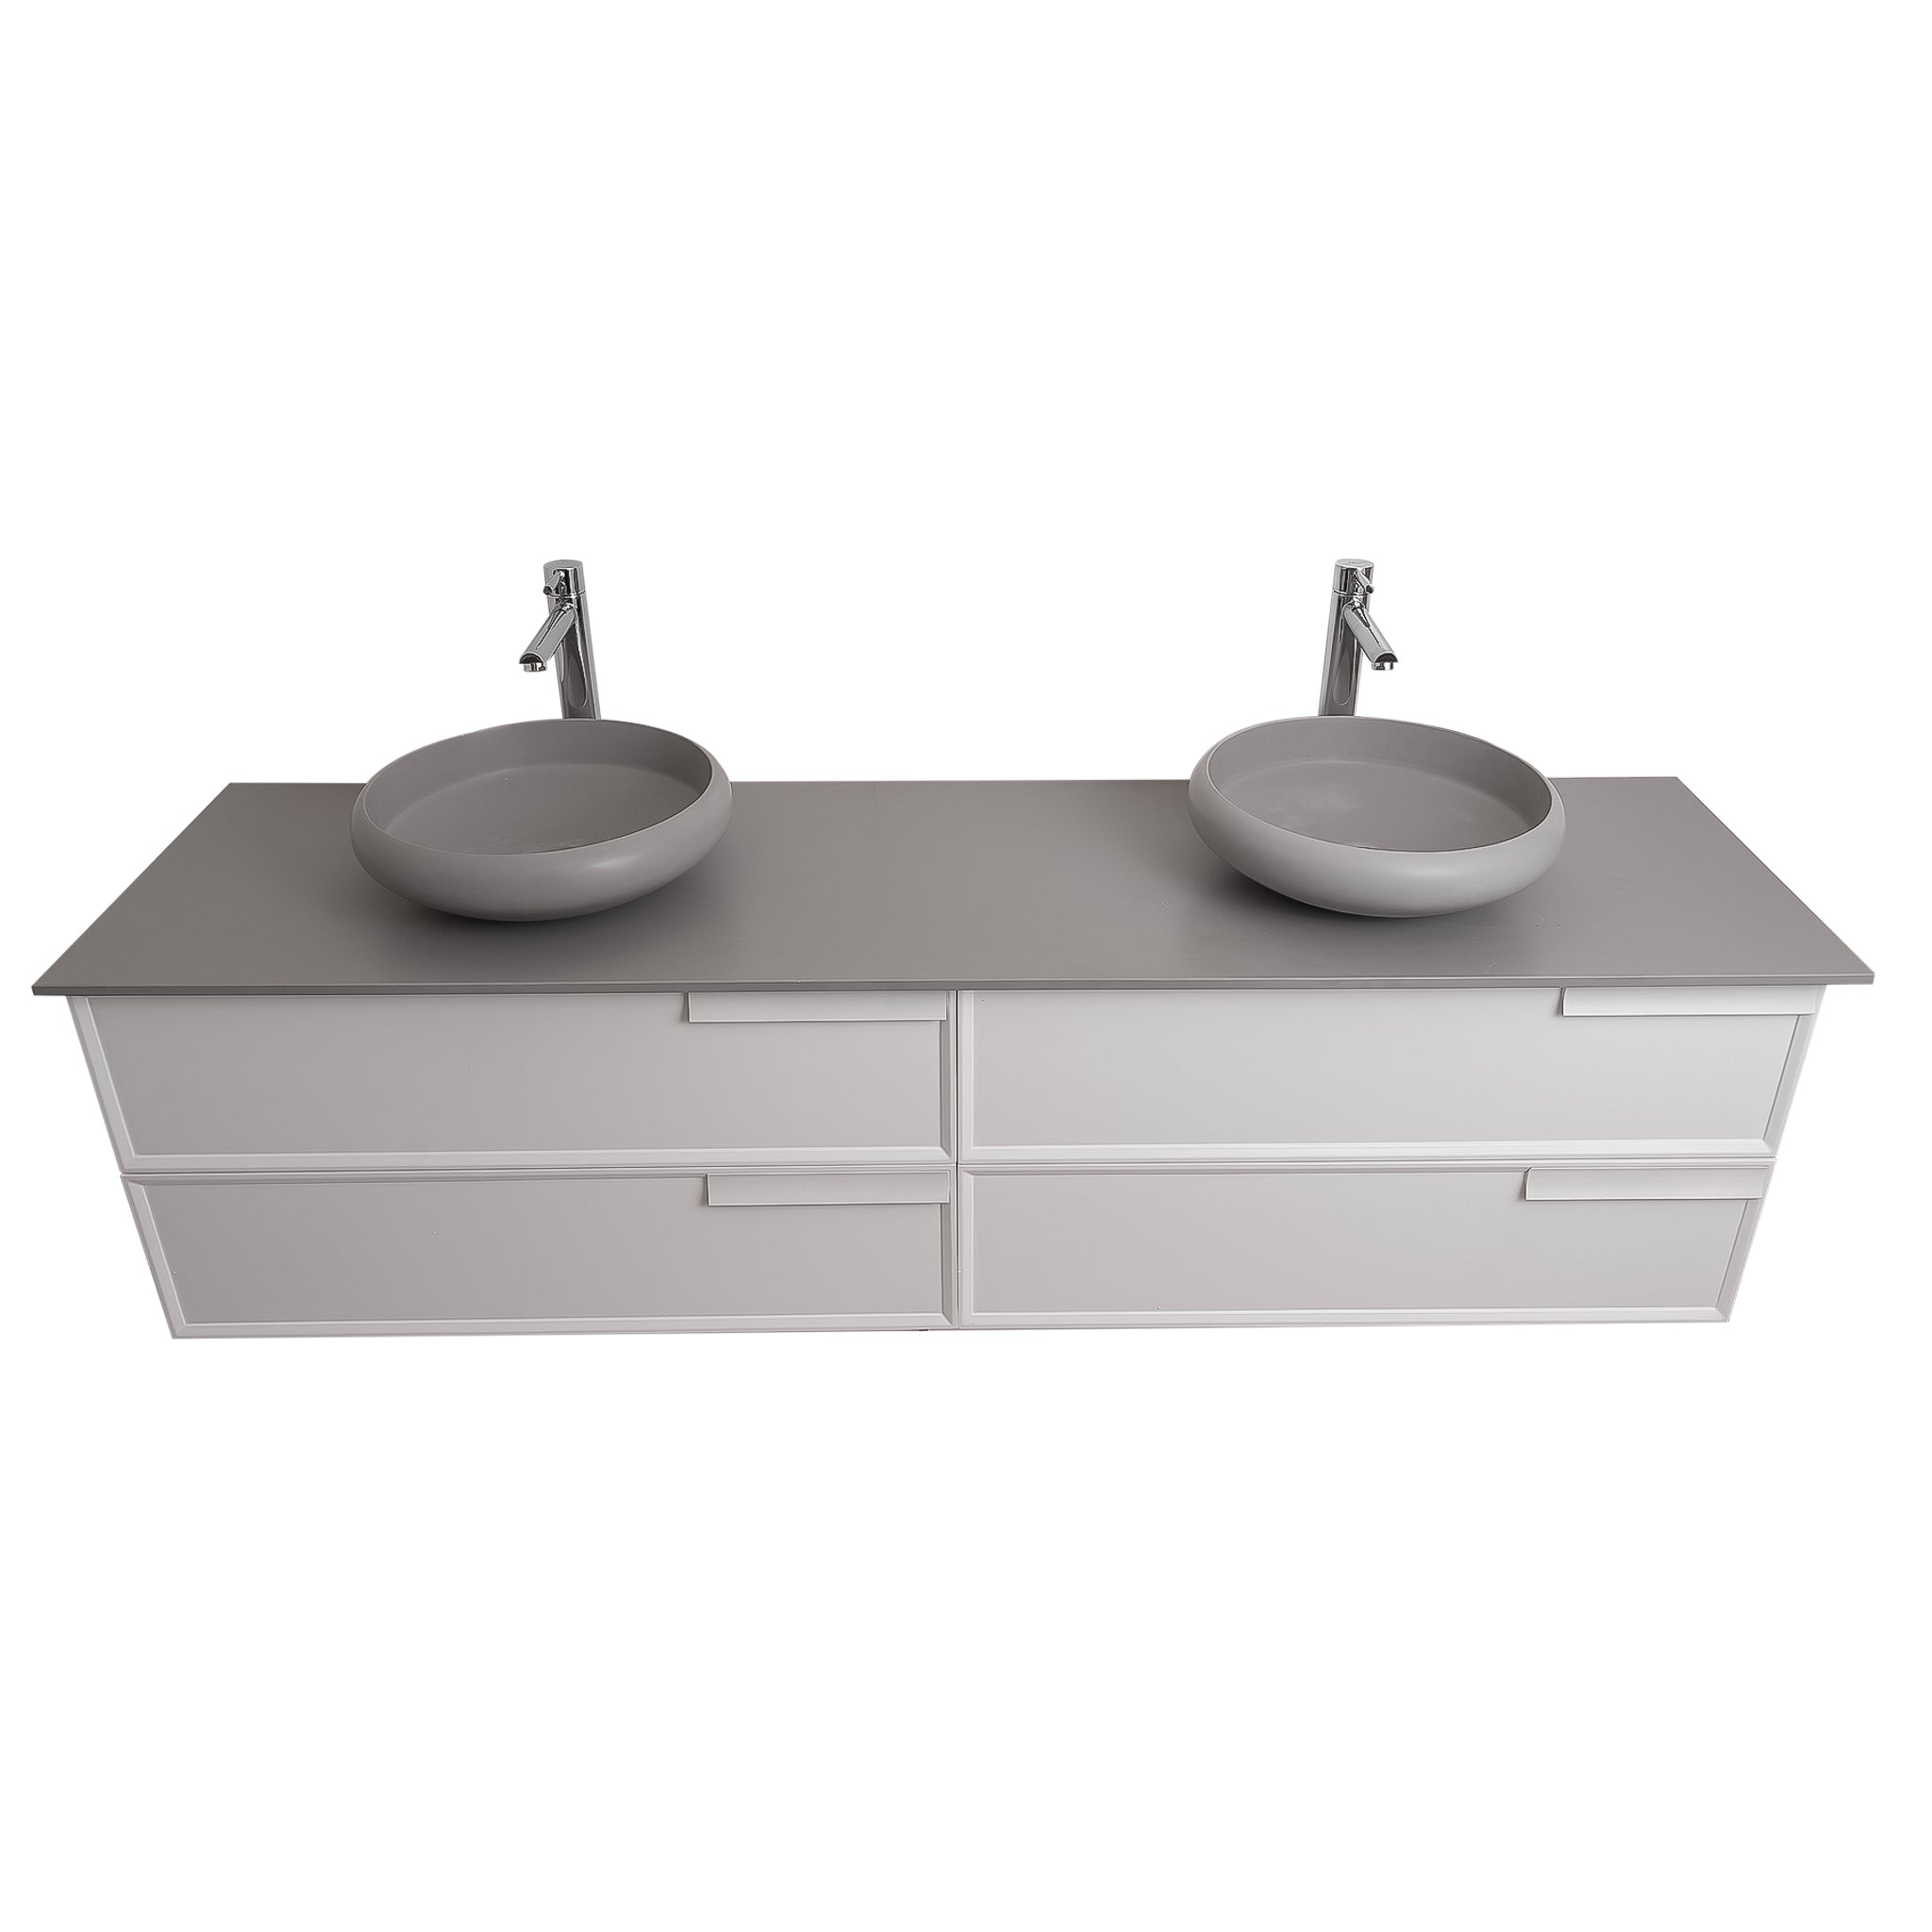 Garda 63 Matte White Cabinet, Solid Surface Flat Grey Counter and Two Round Solid Surface Grey Basin 1153, Wall Mounted Modern Vanity Set